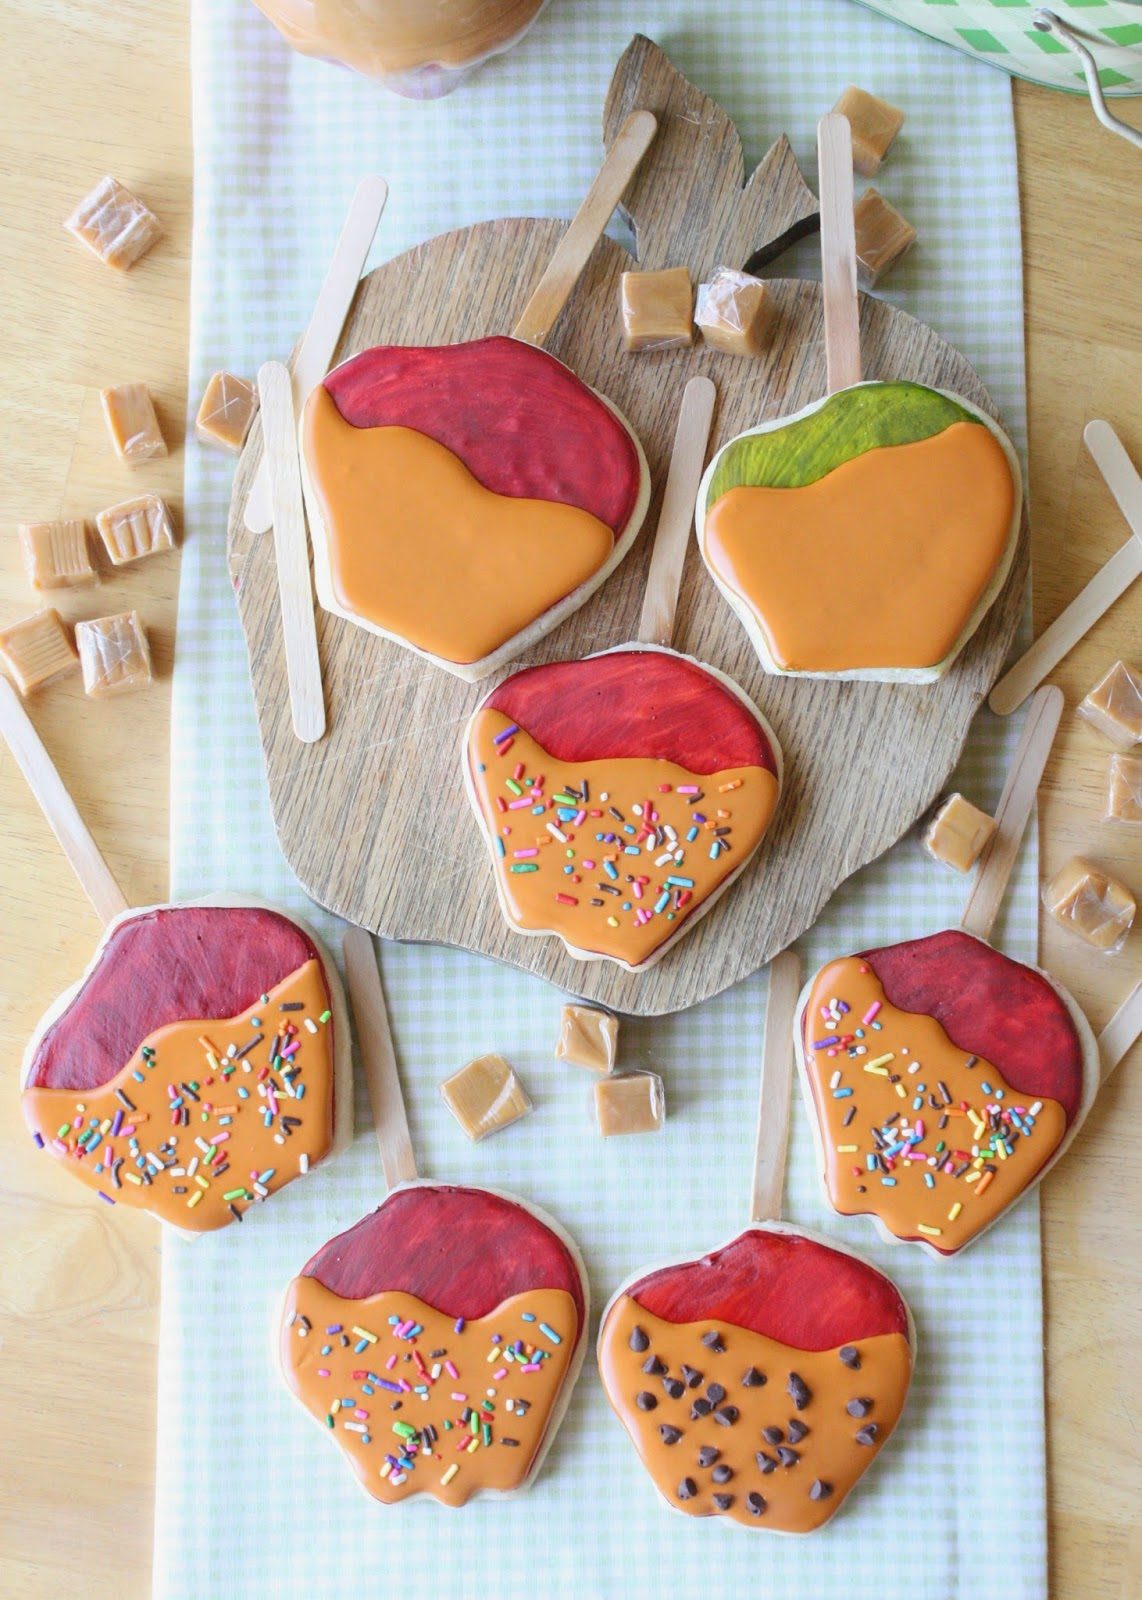 Caramel Apple Decorated Sugar Cookies, Lay The Table